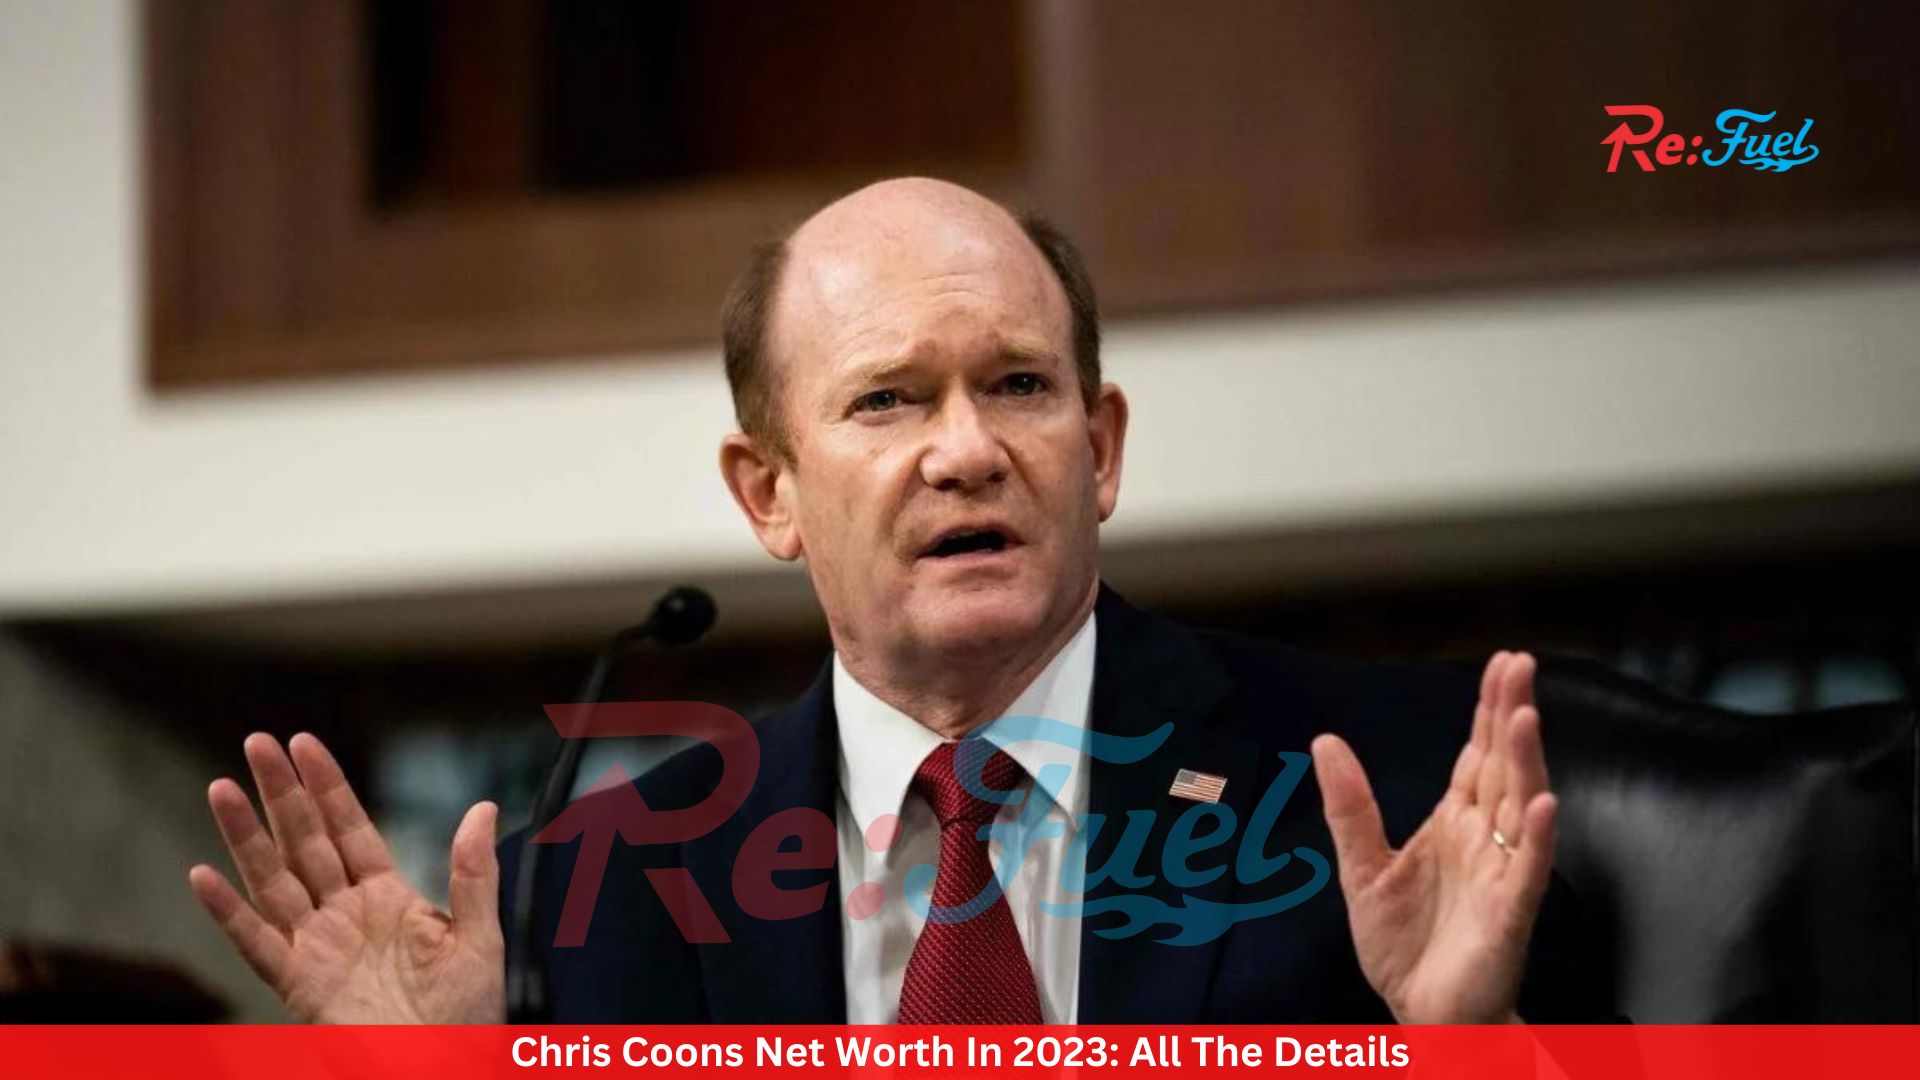 Chris Coons Net Worth In 2023: All The Details